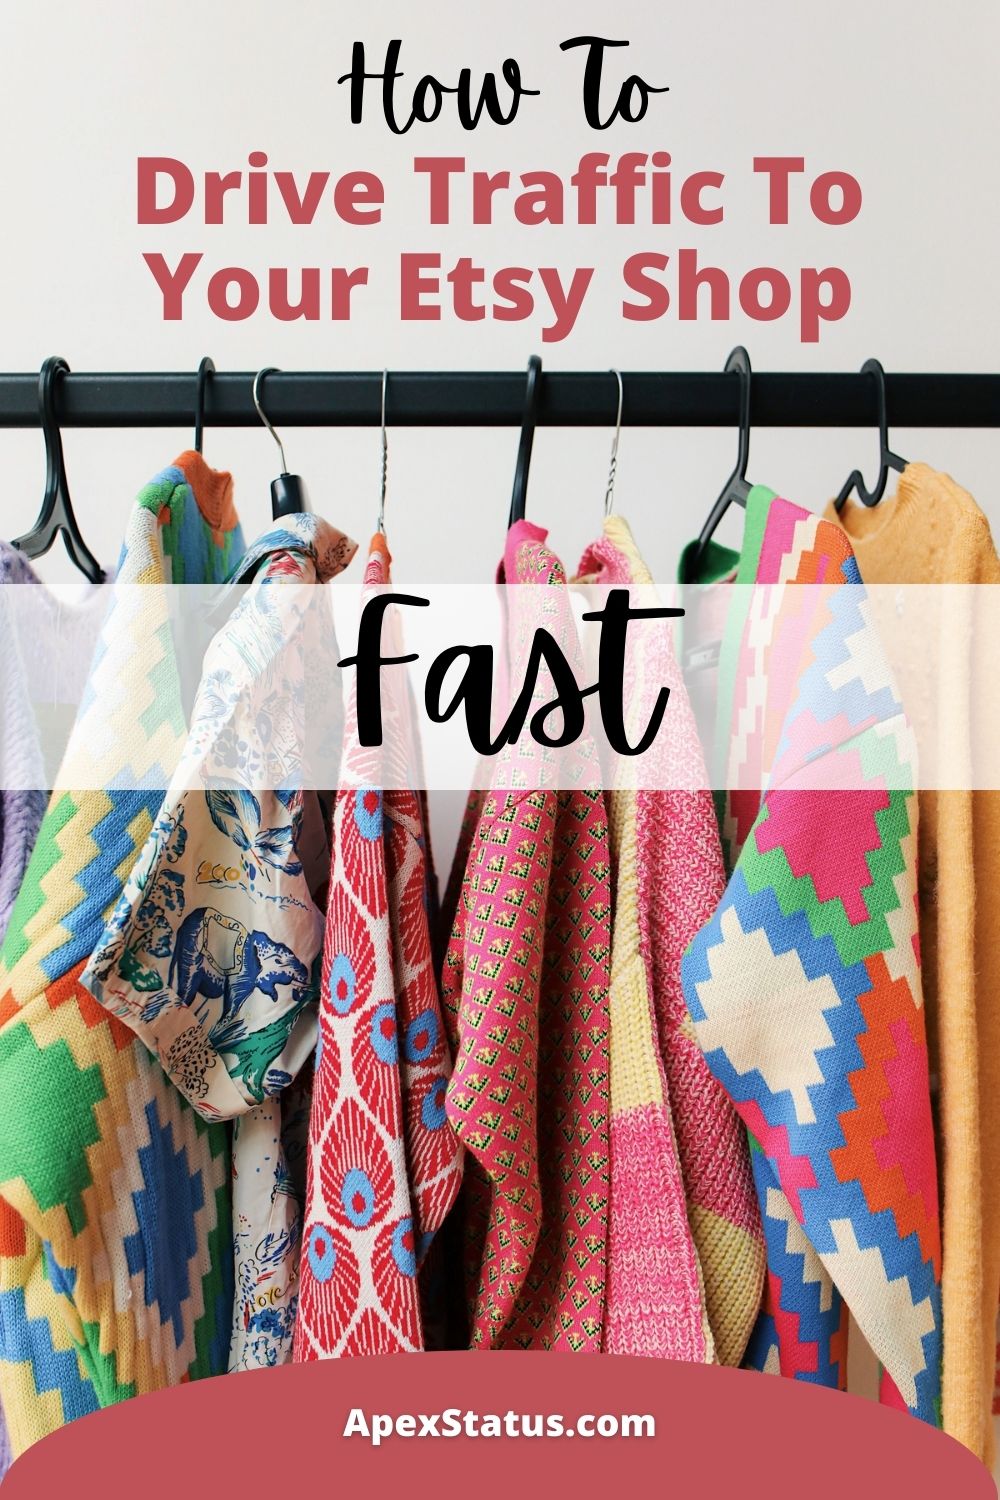 Drive Traffic To Your Etsy Shop Fast